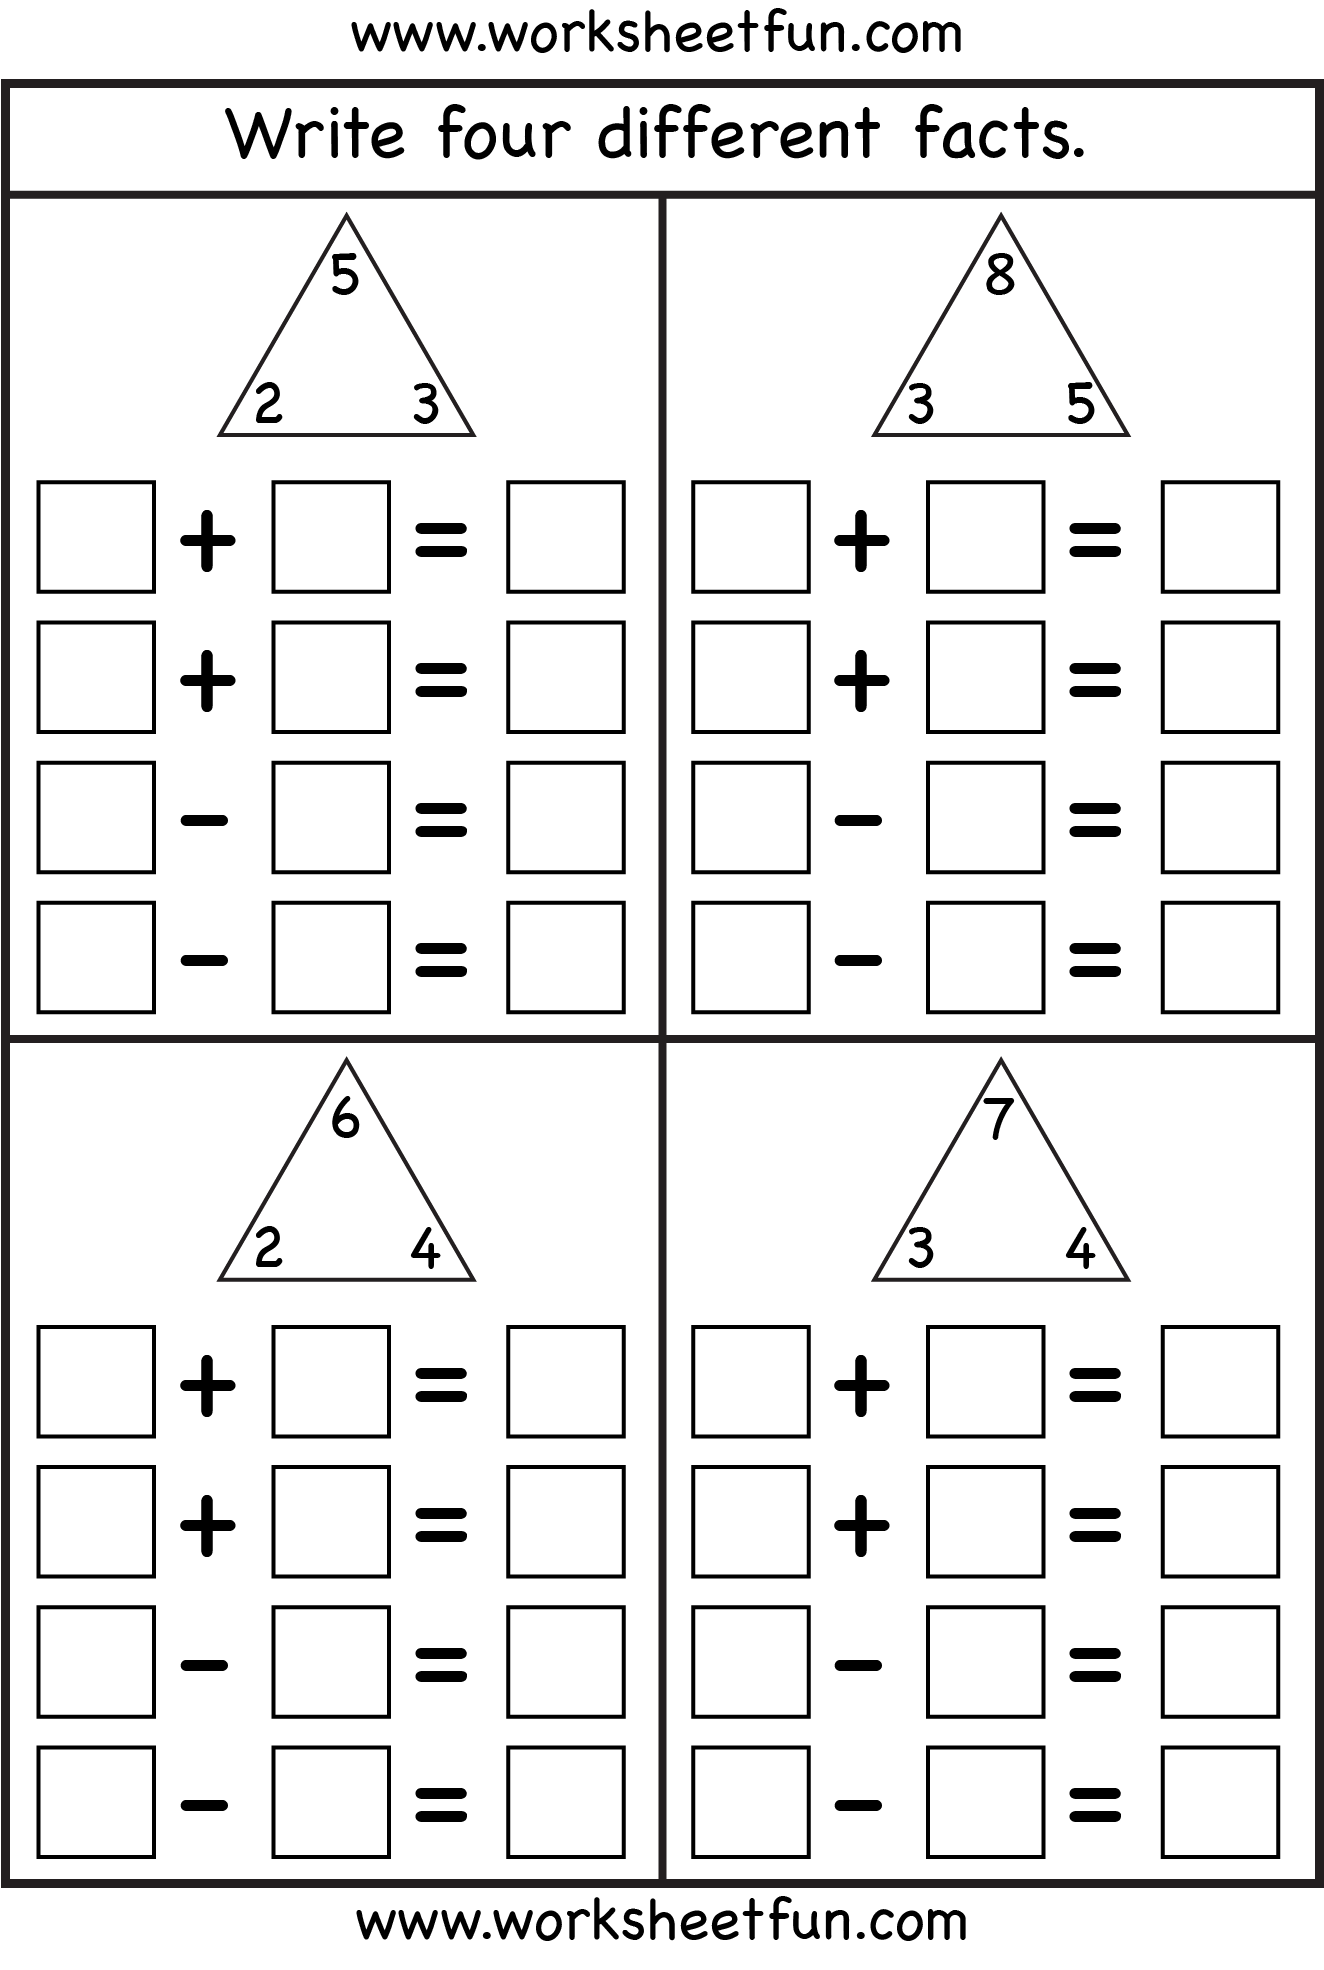 Fact Family – Complete each fact family – 4 Worksheets / FREE Printable